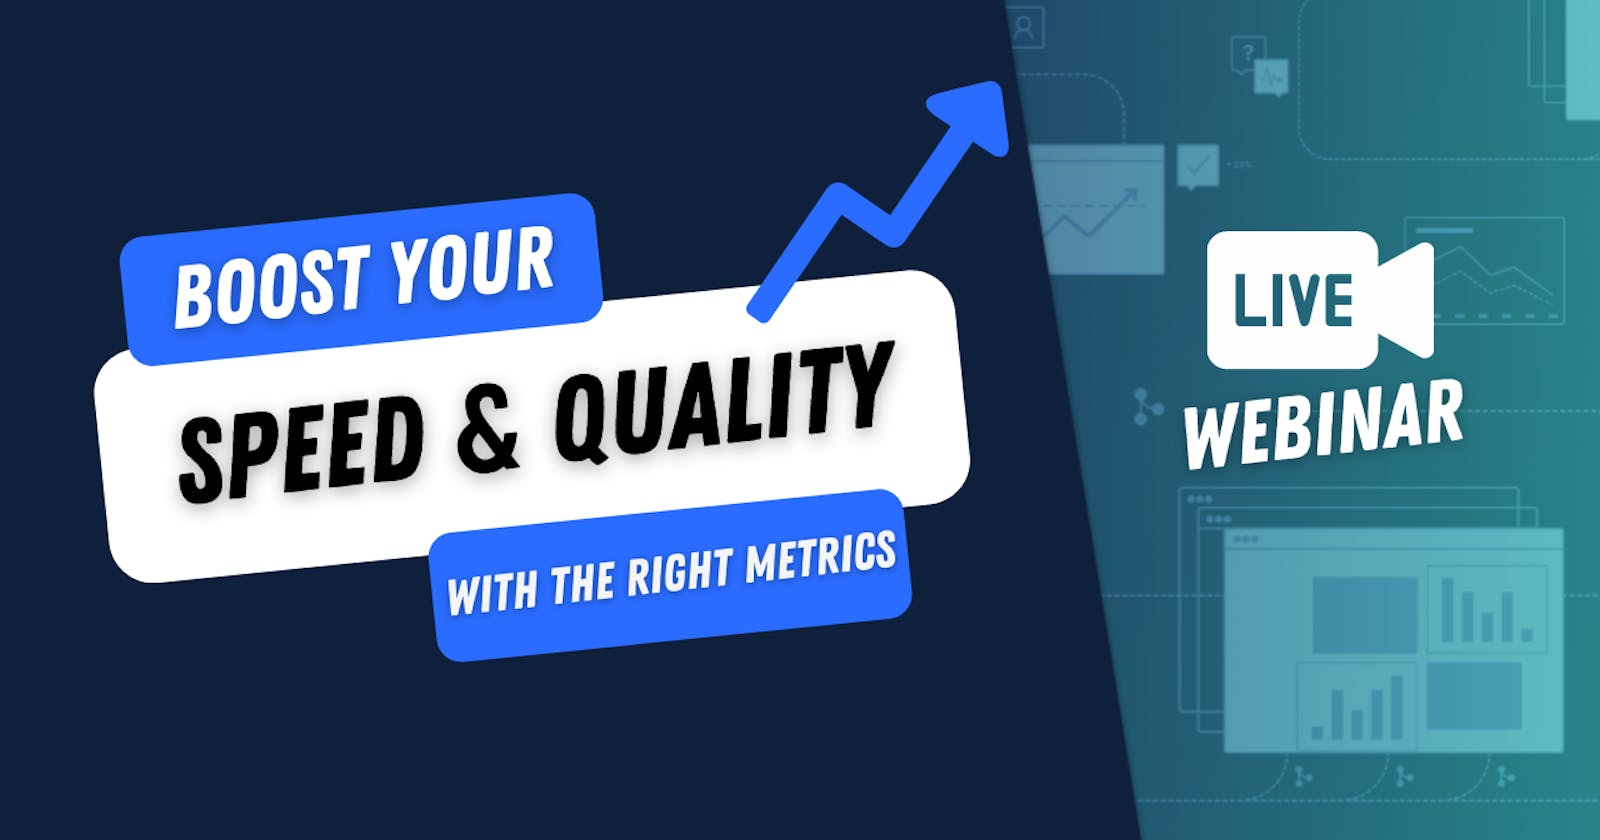 How to boost your Engineering Speed & Quality with the right Metrics